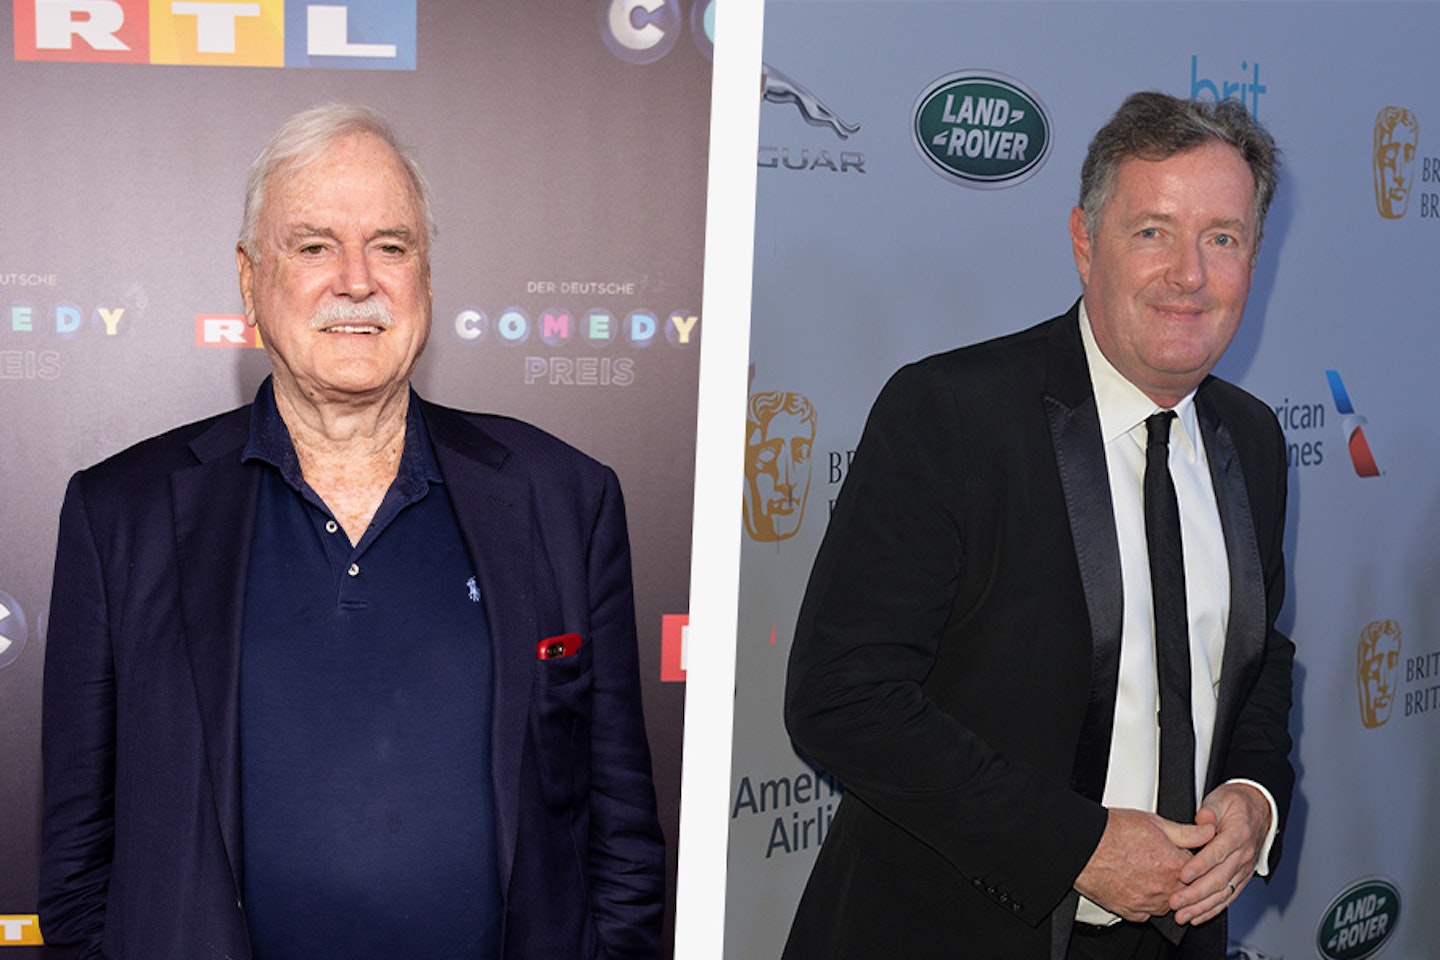 Left- John Cleese pose for the 23rd annual German Comedy Awards 2019 in Cologne, Germany. Right- Piers Morgan attends 2019 British Academy Britannia Awards, October 2019.